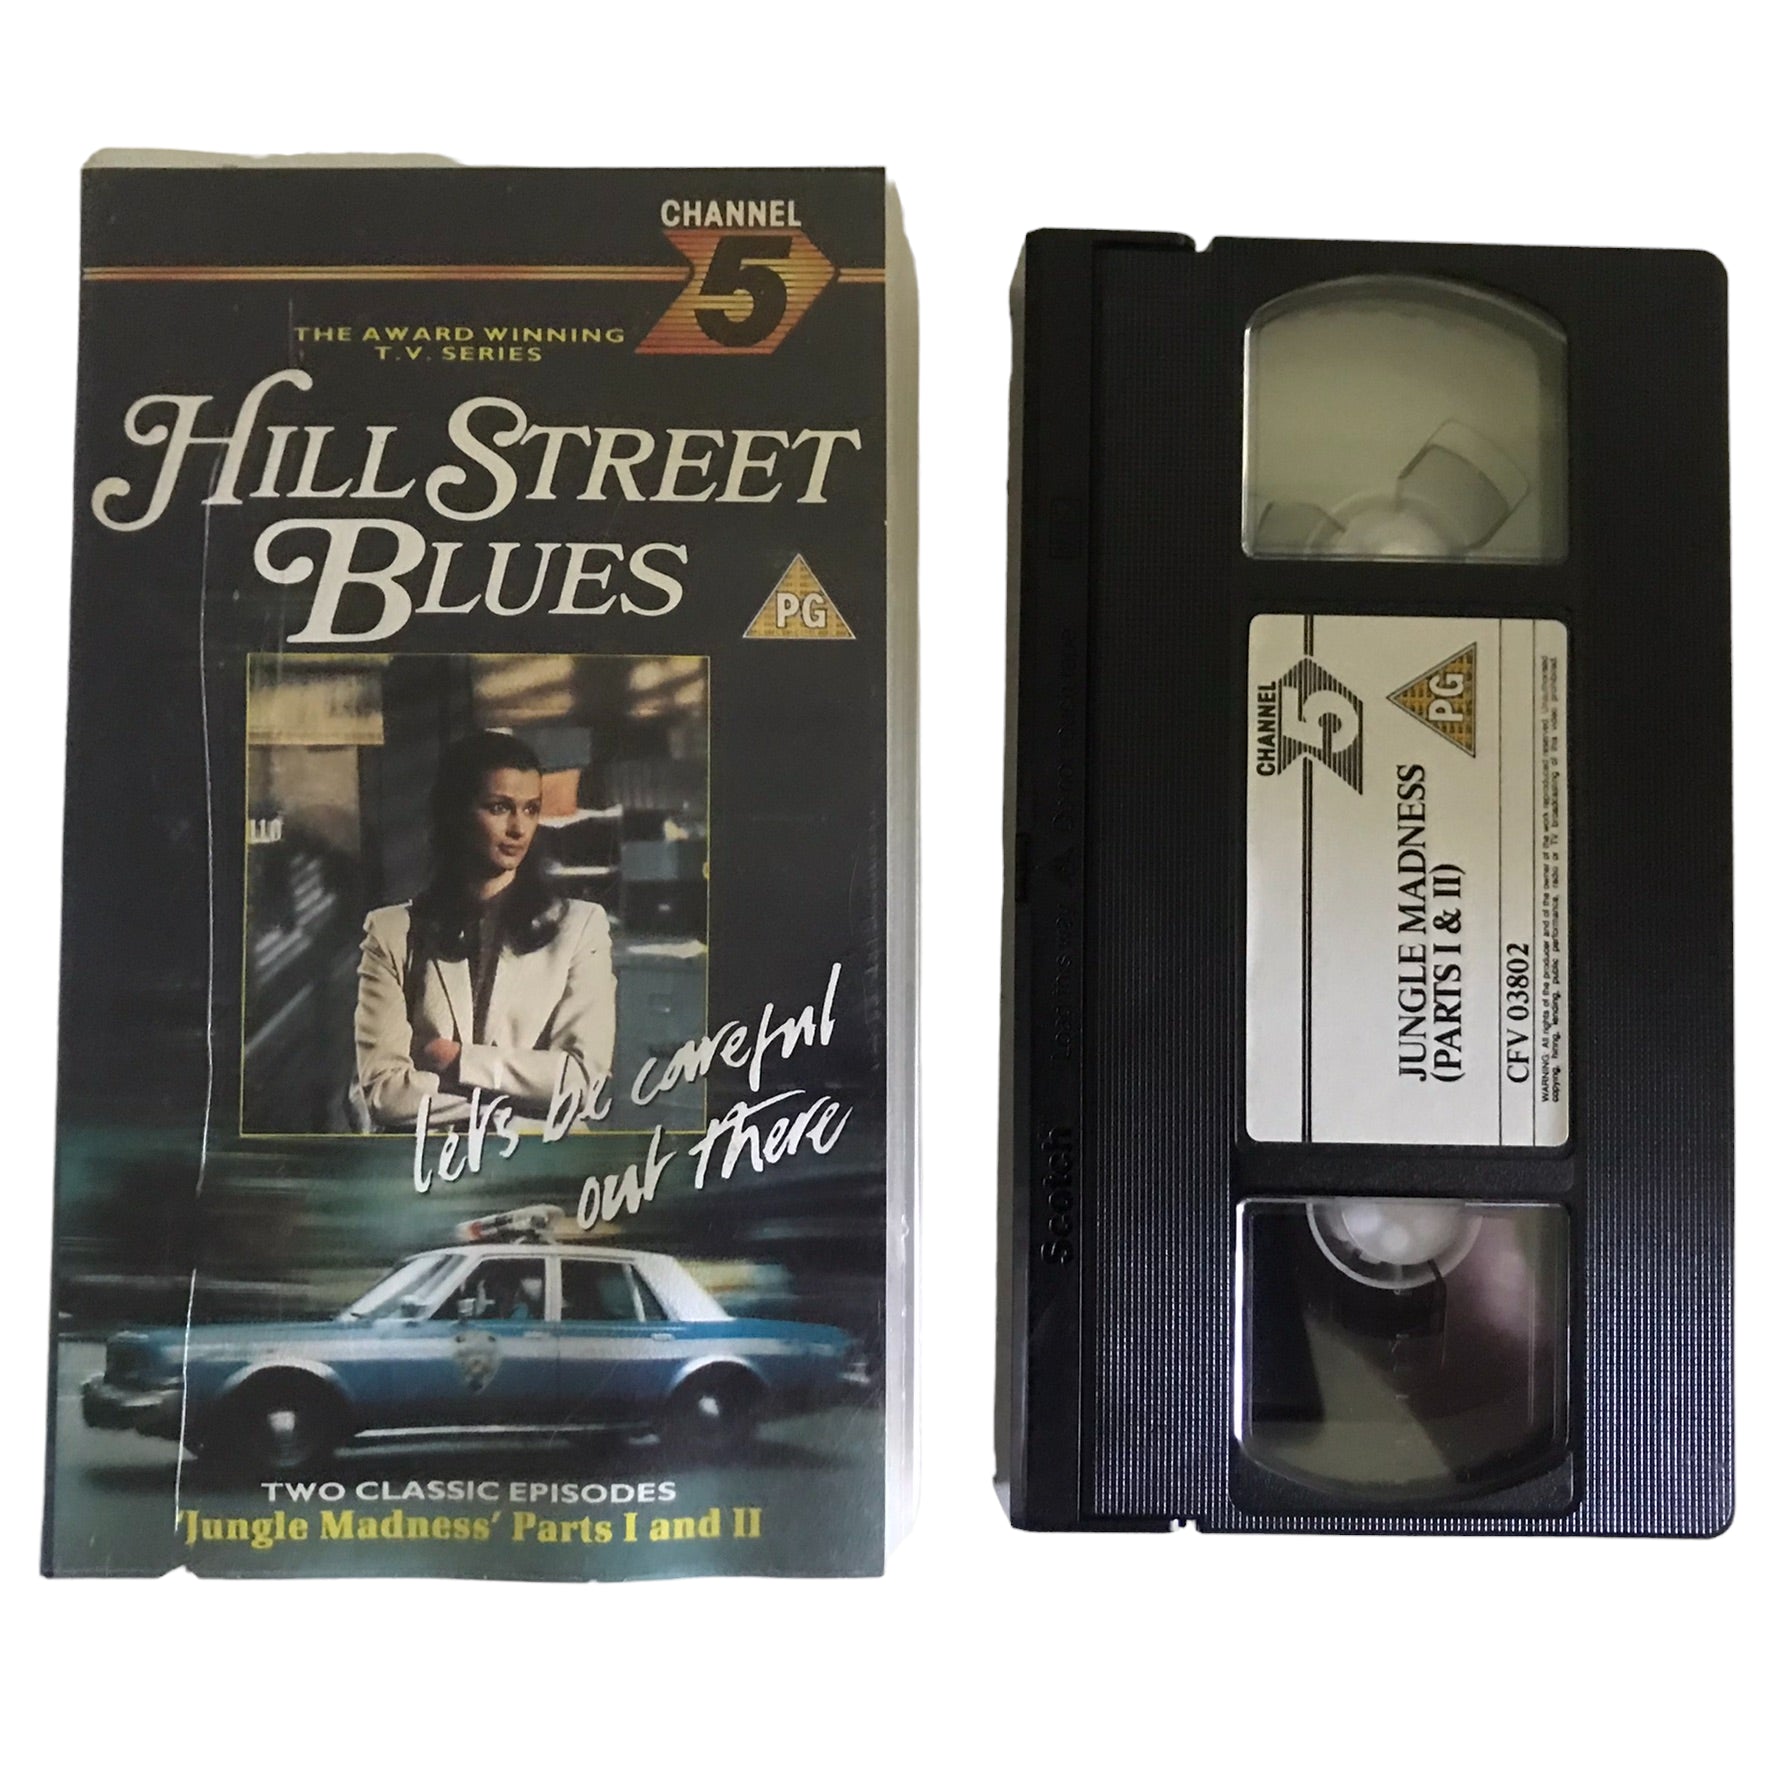 Hill Street Blues - Jungle Madness (Parts 1 & 2) - Frank Furillo - Channel 5 Video - Drama - Pal - VHS-